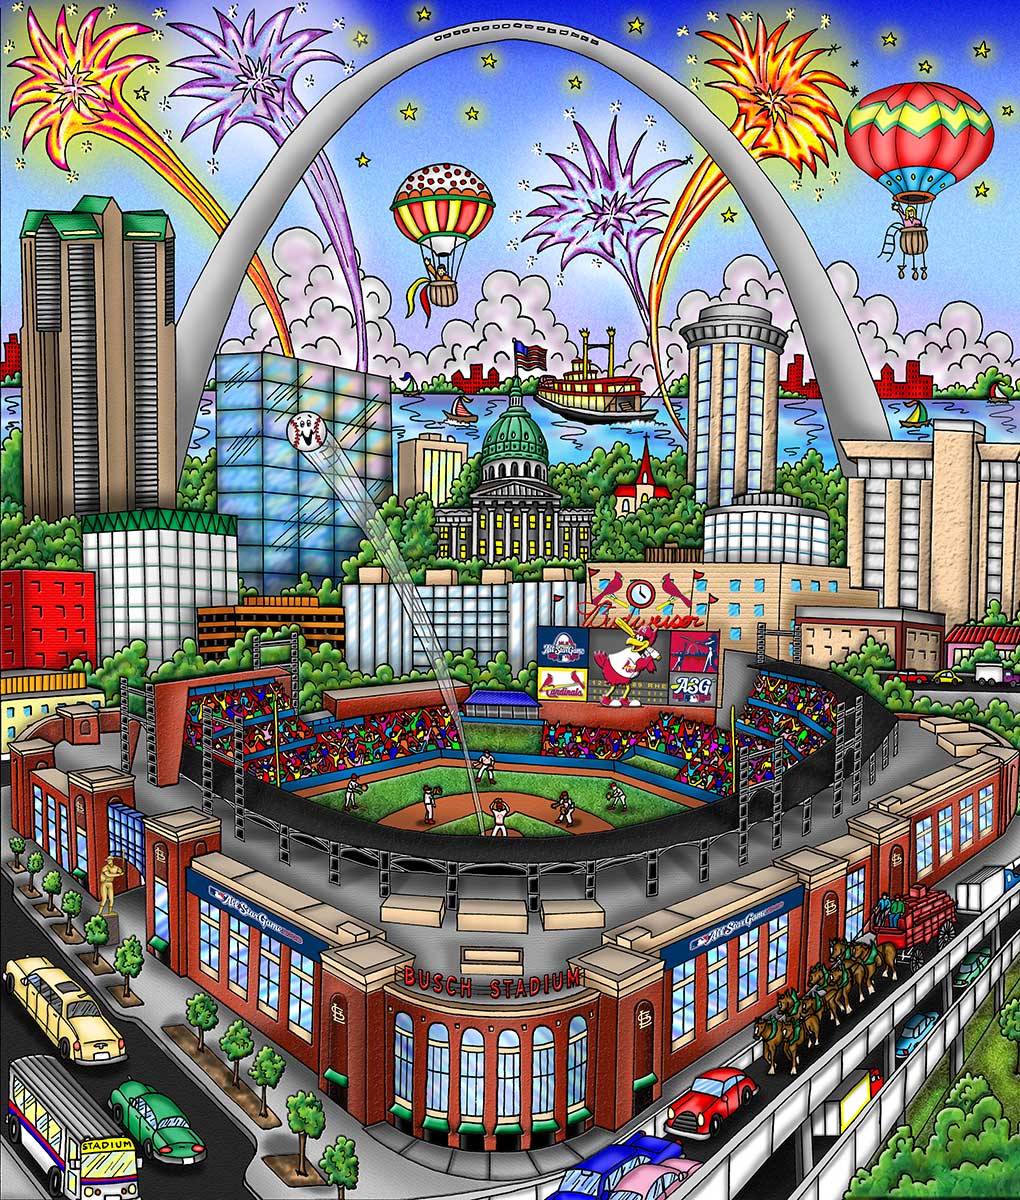 MLB All-Star Game 2009: St. Louis